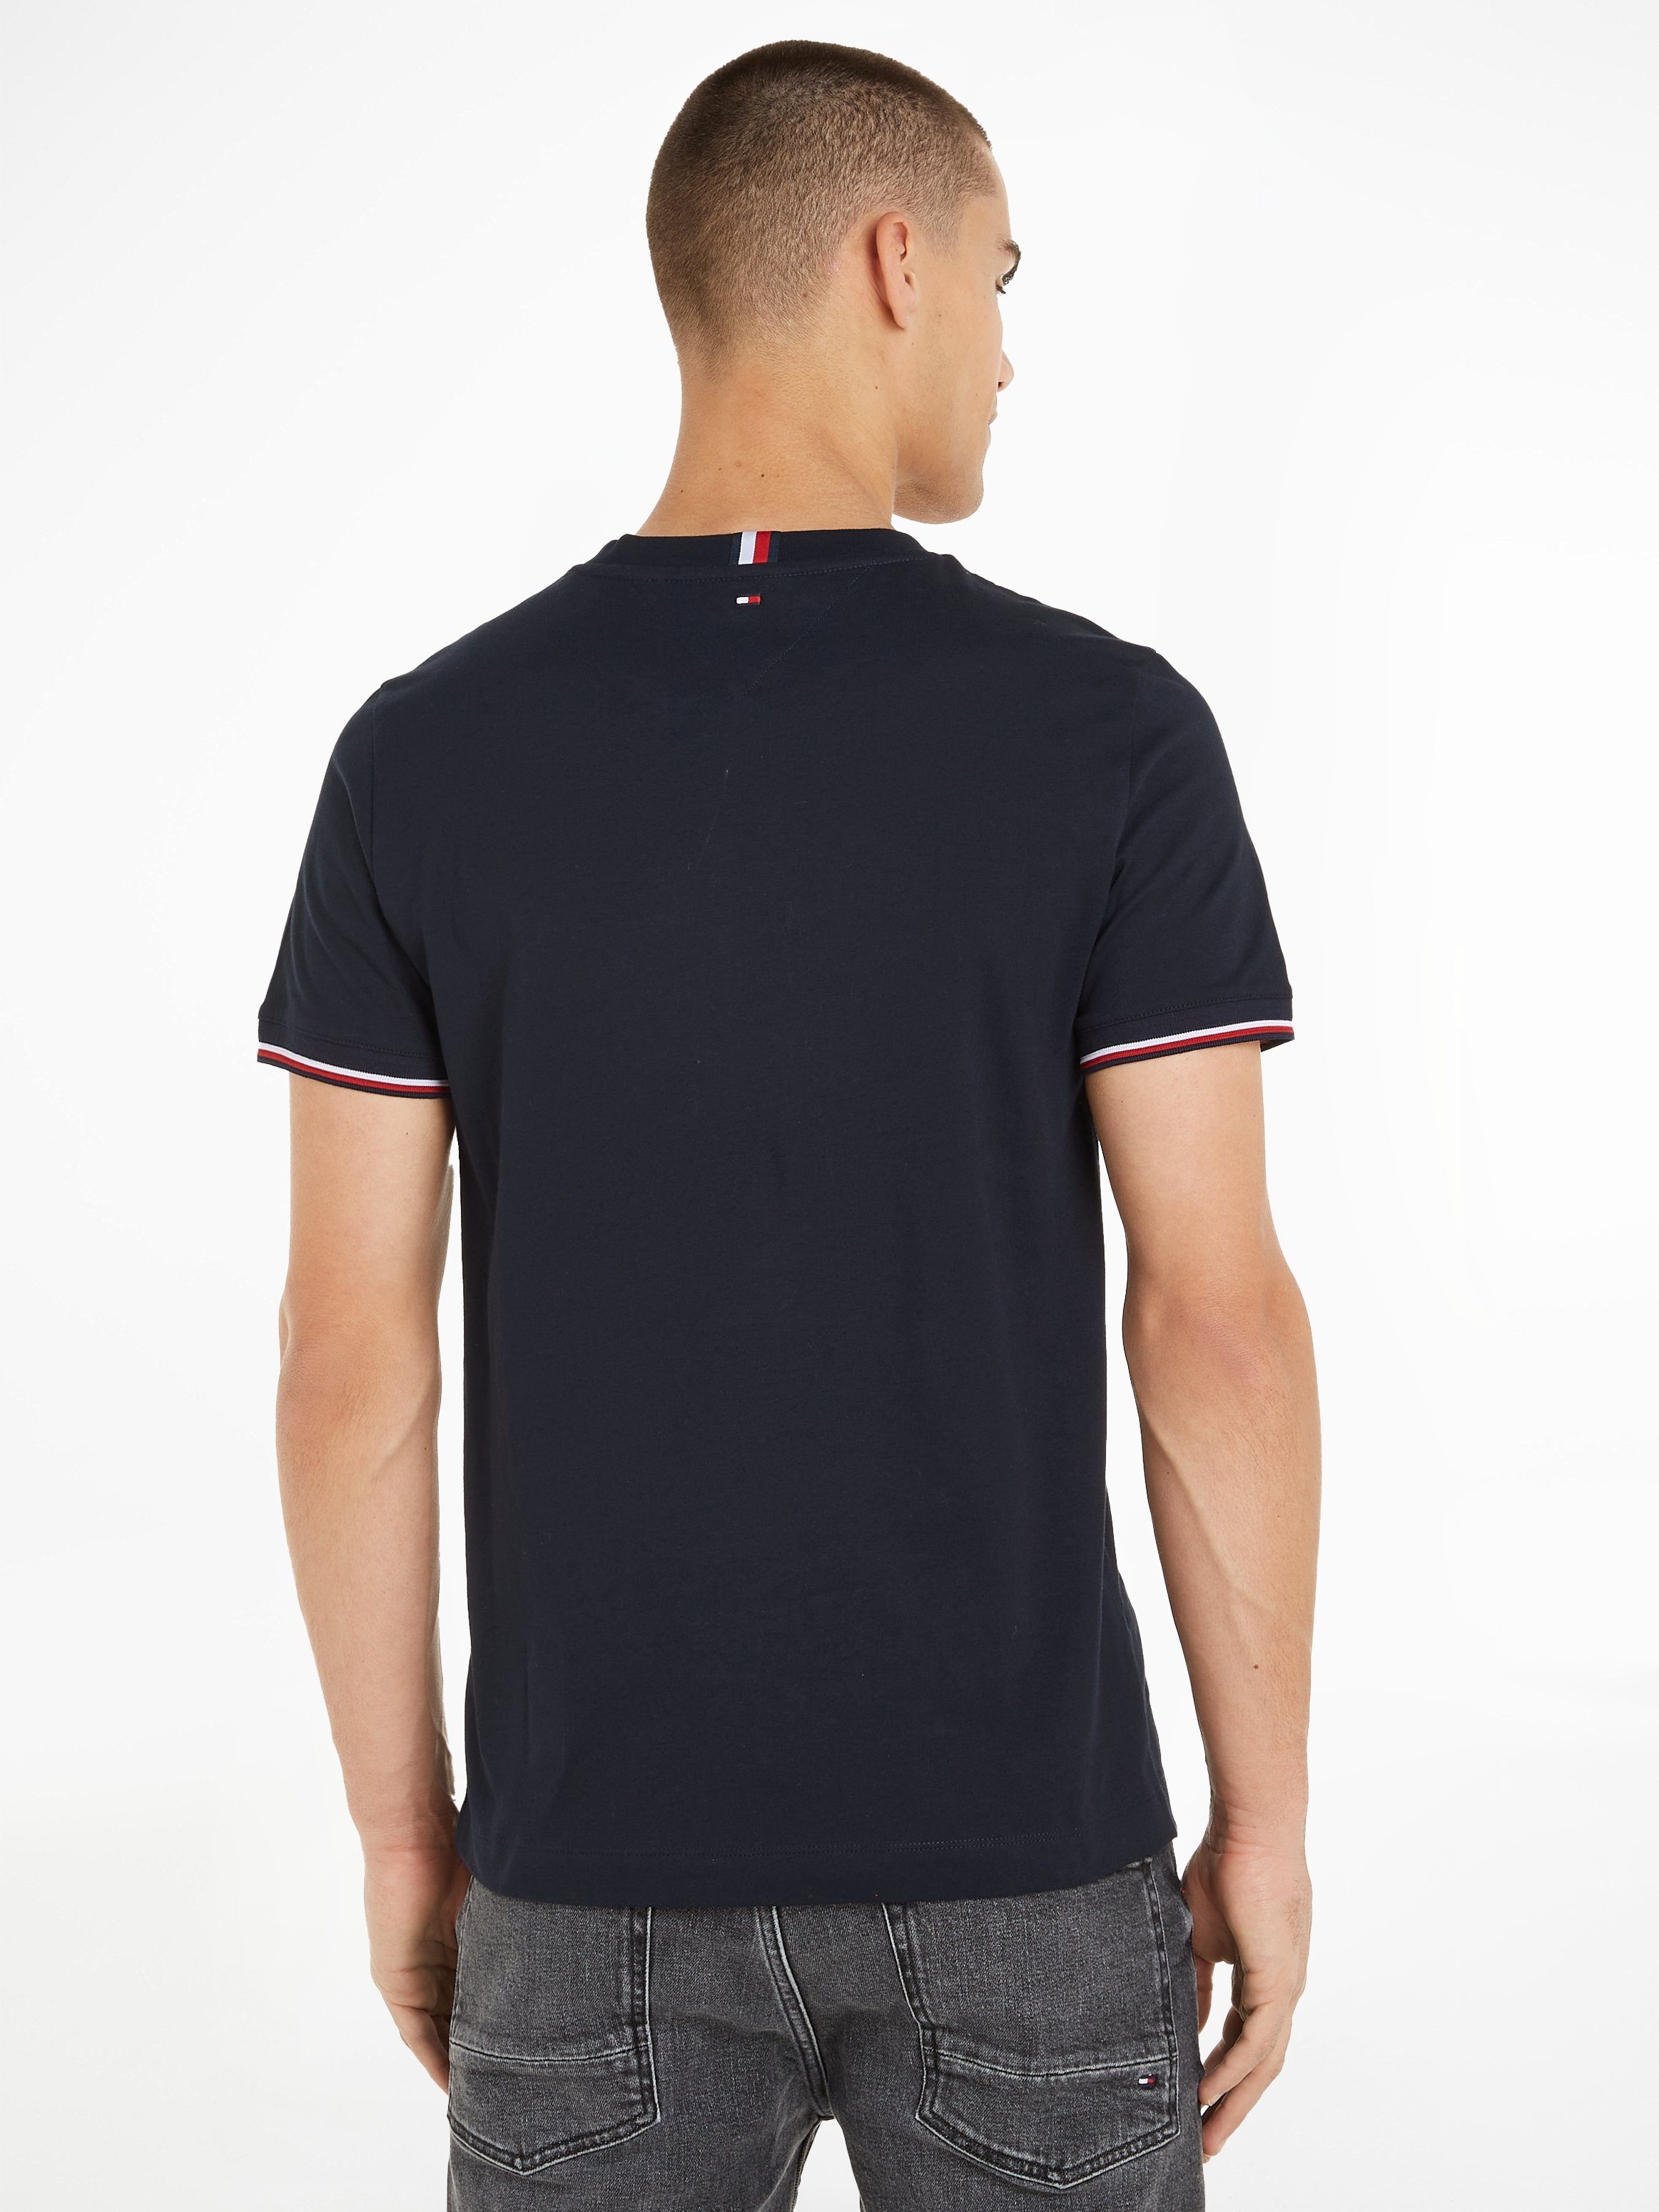 LOGO Hilfiger Sky TEE T-Shirt Desert TOMMY TIPPED Tommy